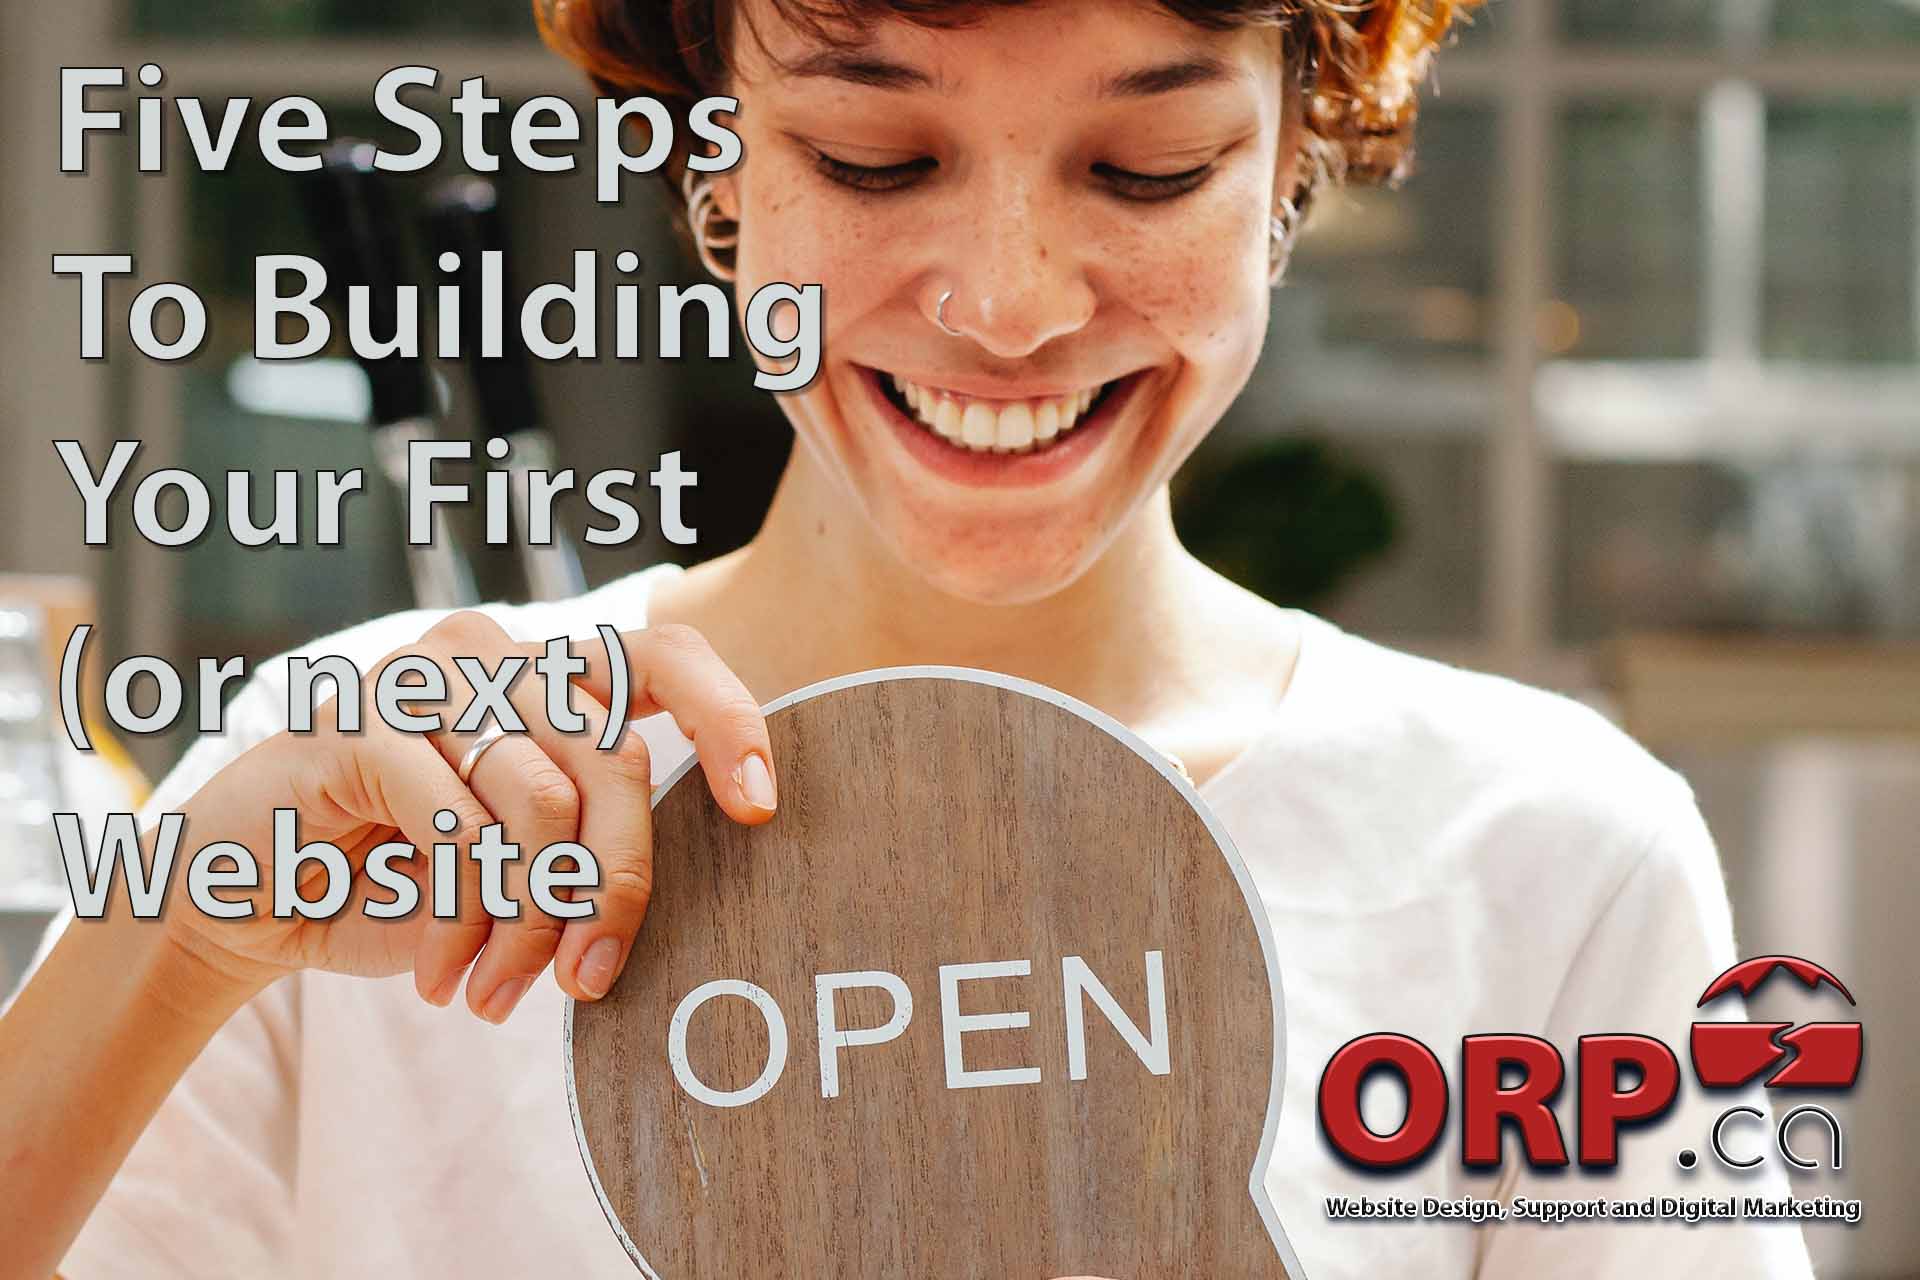 Five Steps To Building Your First Website A Practical Guide For New Business Owners That Experienced Professionals Can Use As Well - A Blog Article From The Team At ORP.ca - Providing Website Design and Development, Graphic Design and Marketing Services To New and Small Businesses Since 2003.